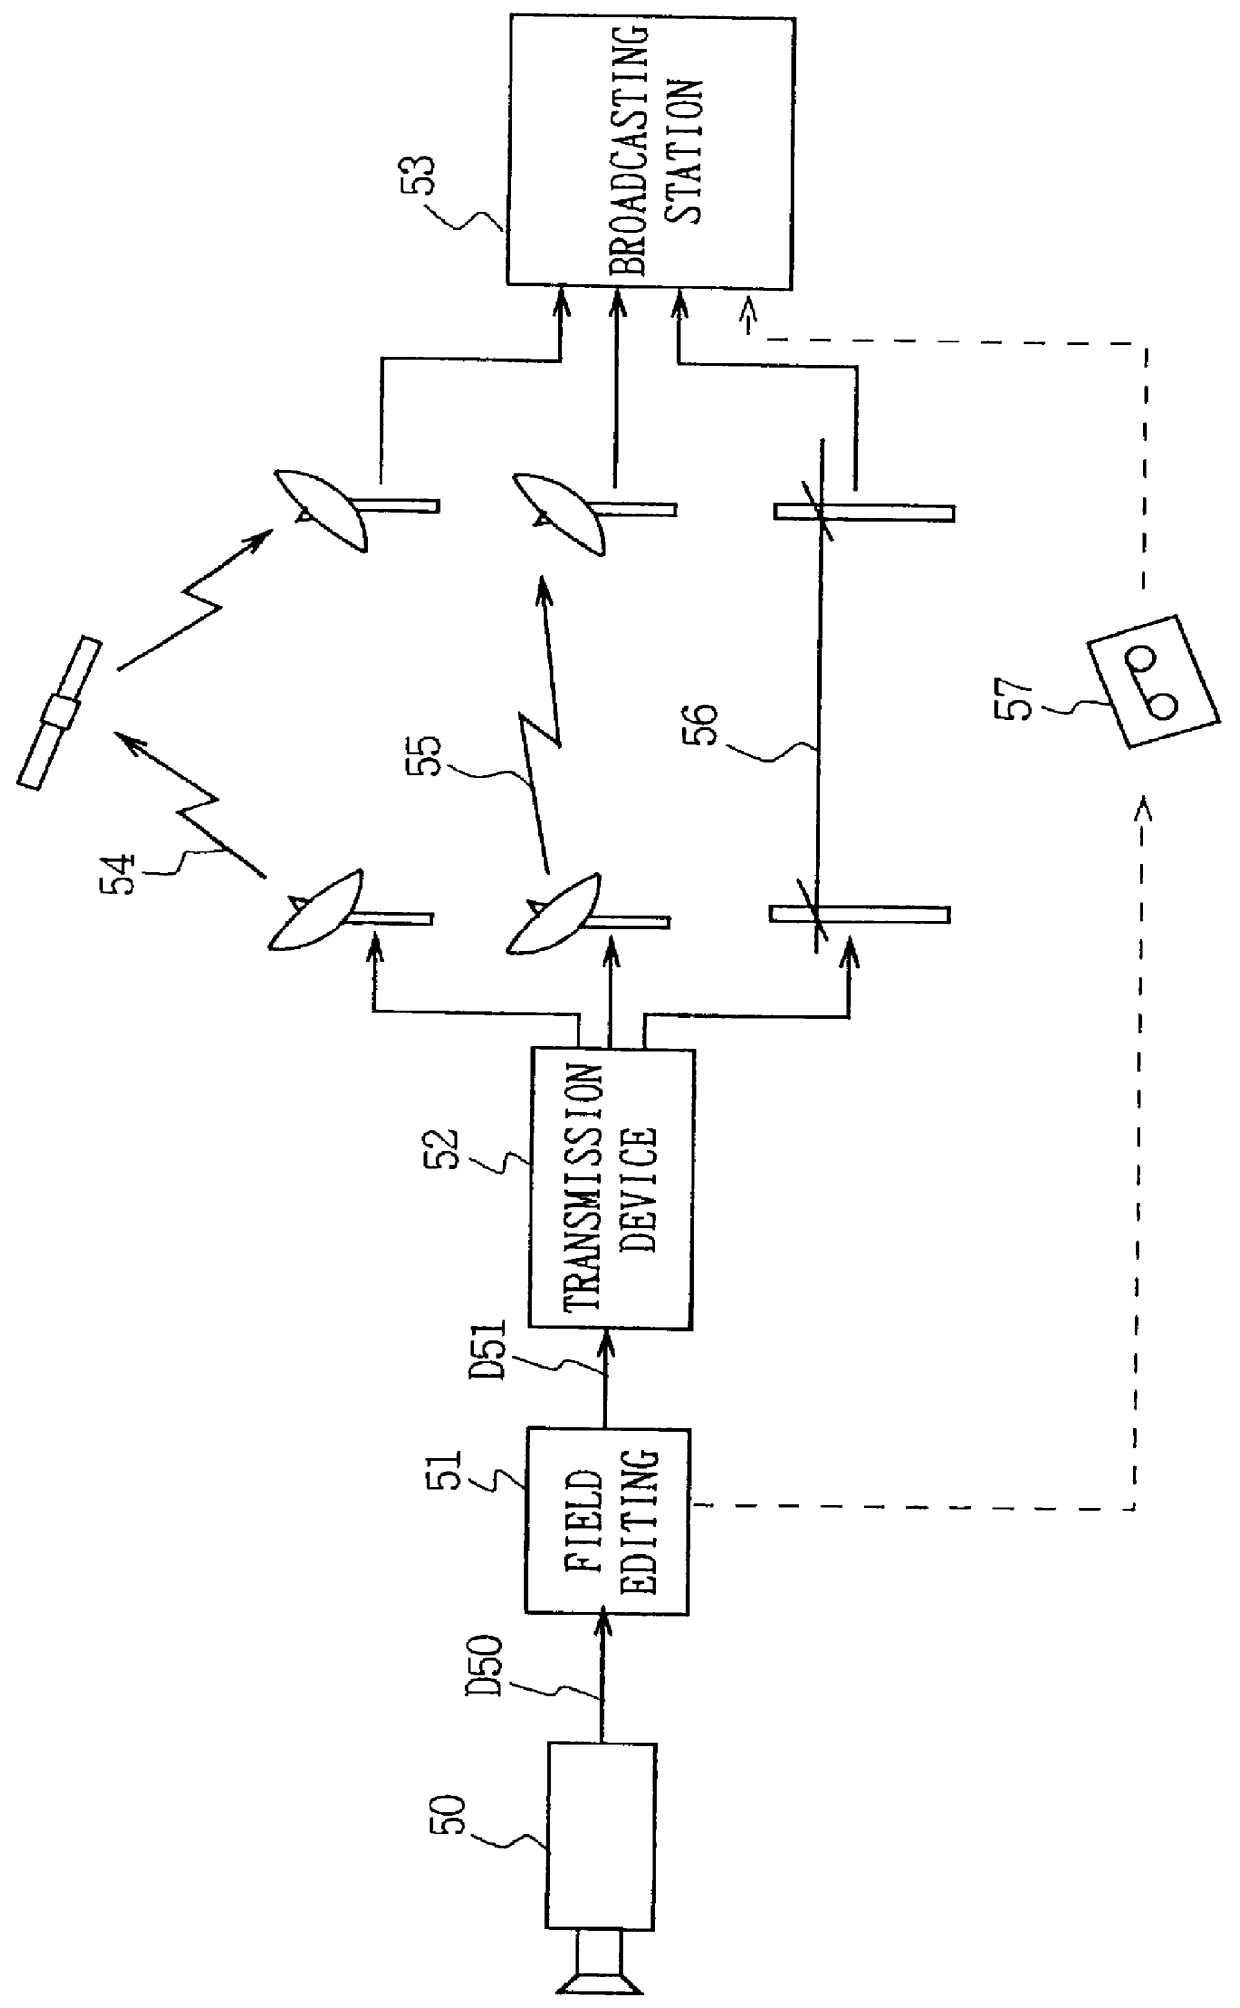 Video signal processing device that facilitates editing by producing control information from detected video signal information